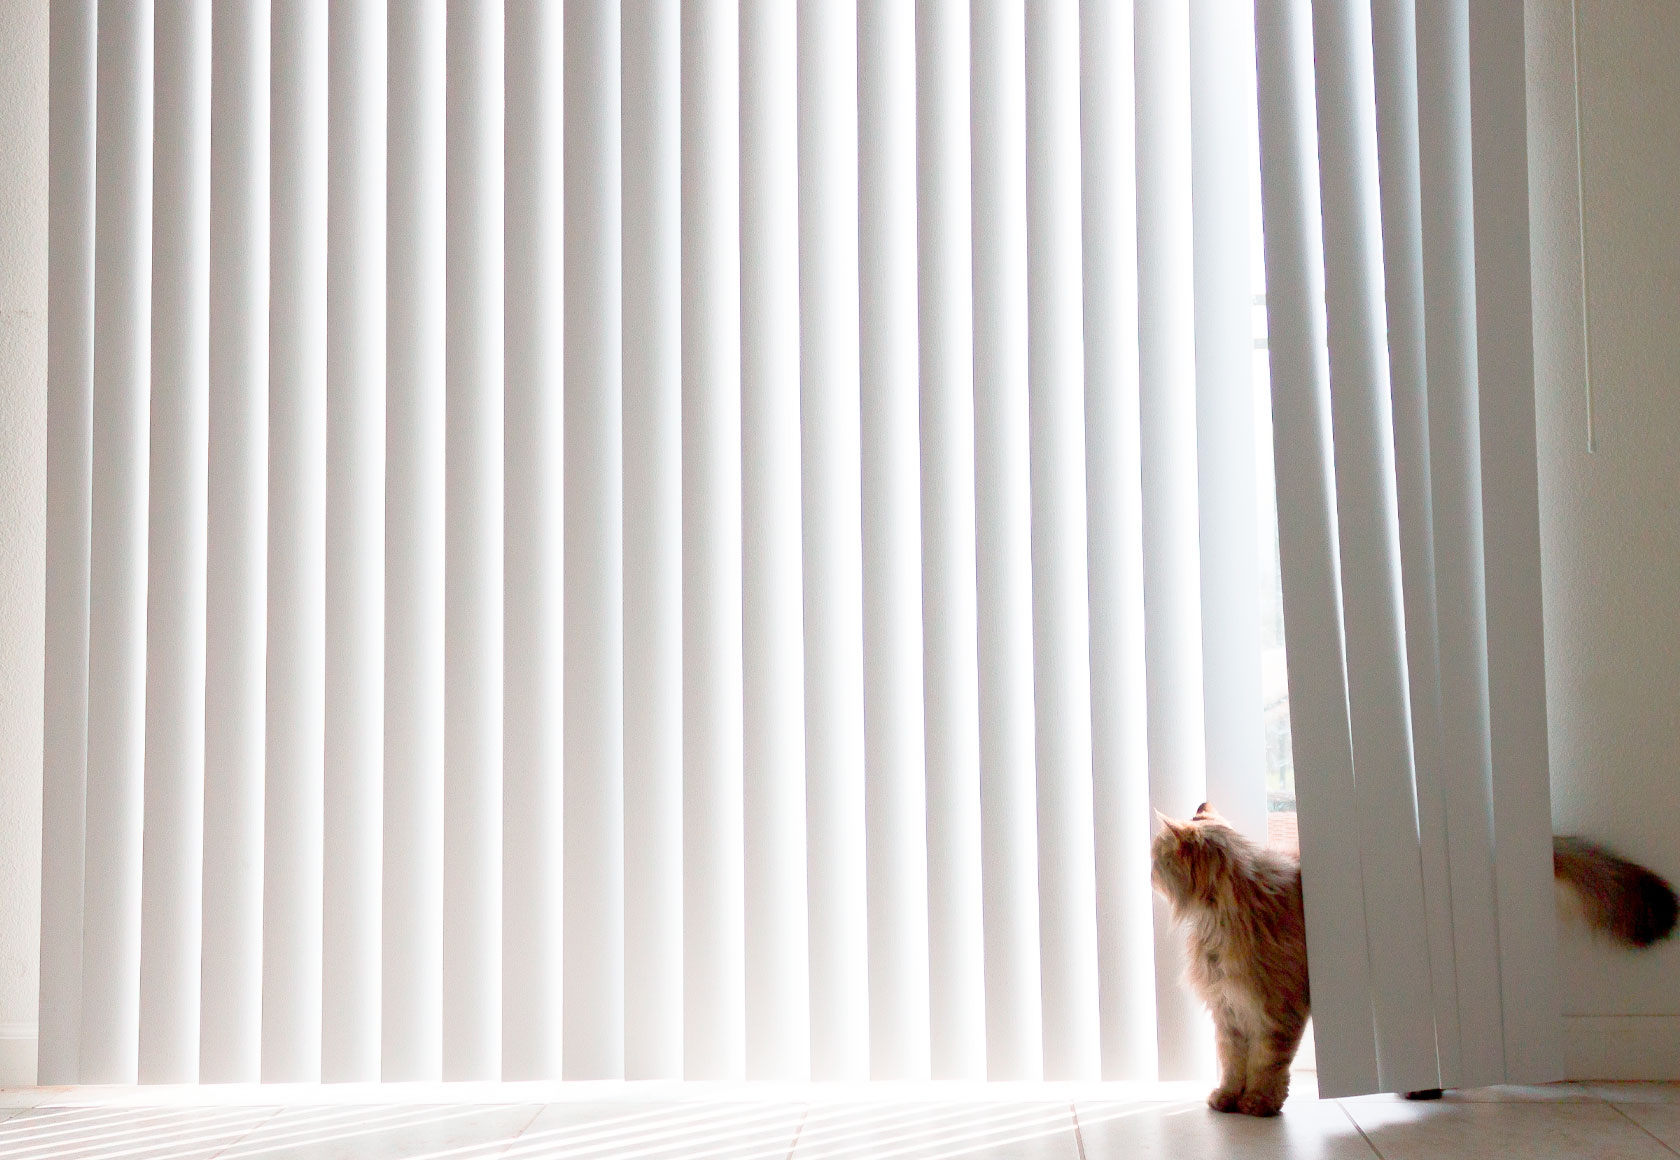 How To Fix Vertical Blinds That Won’t Open